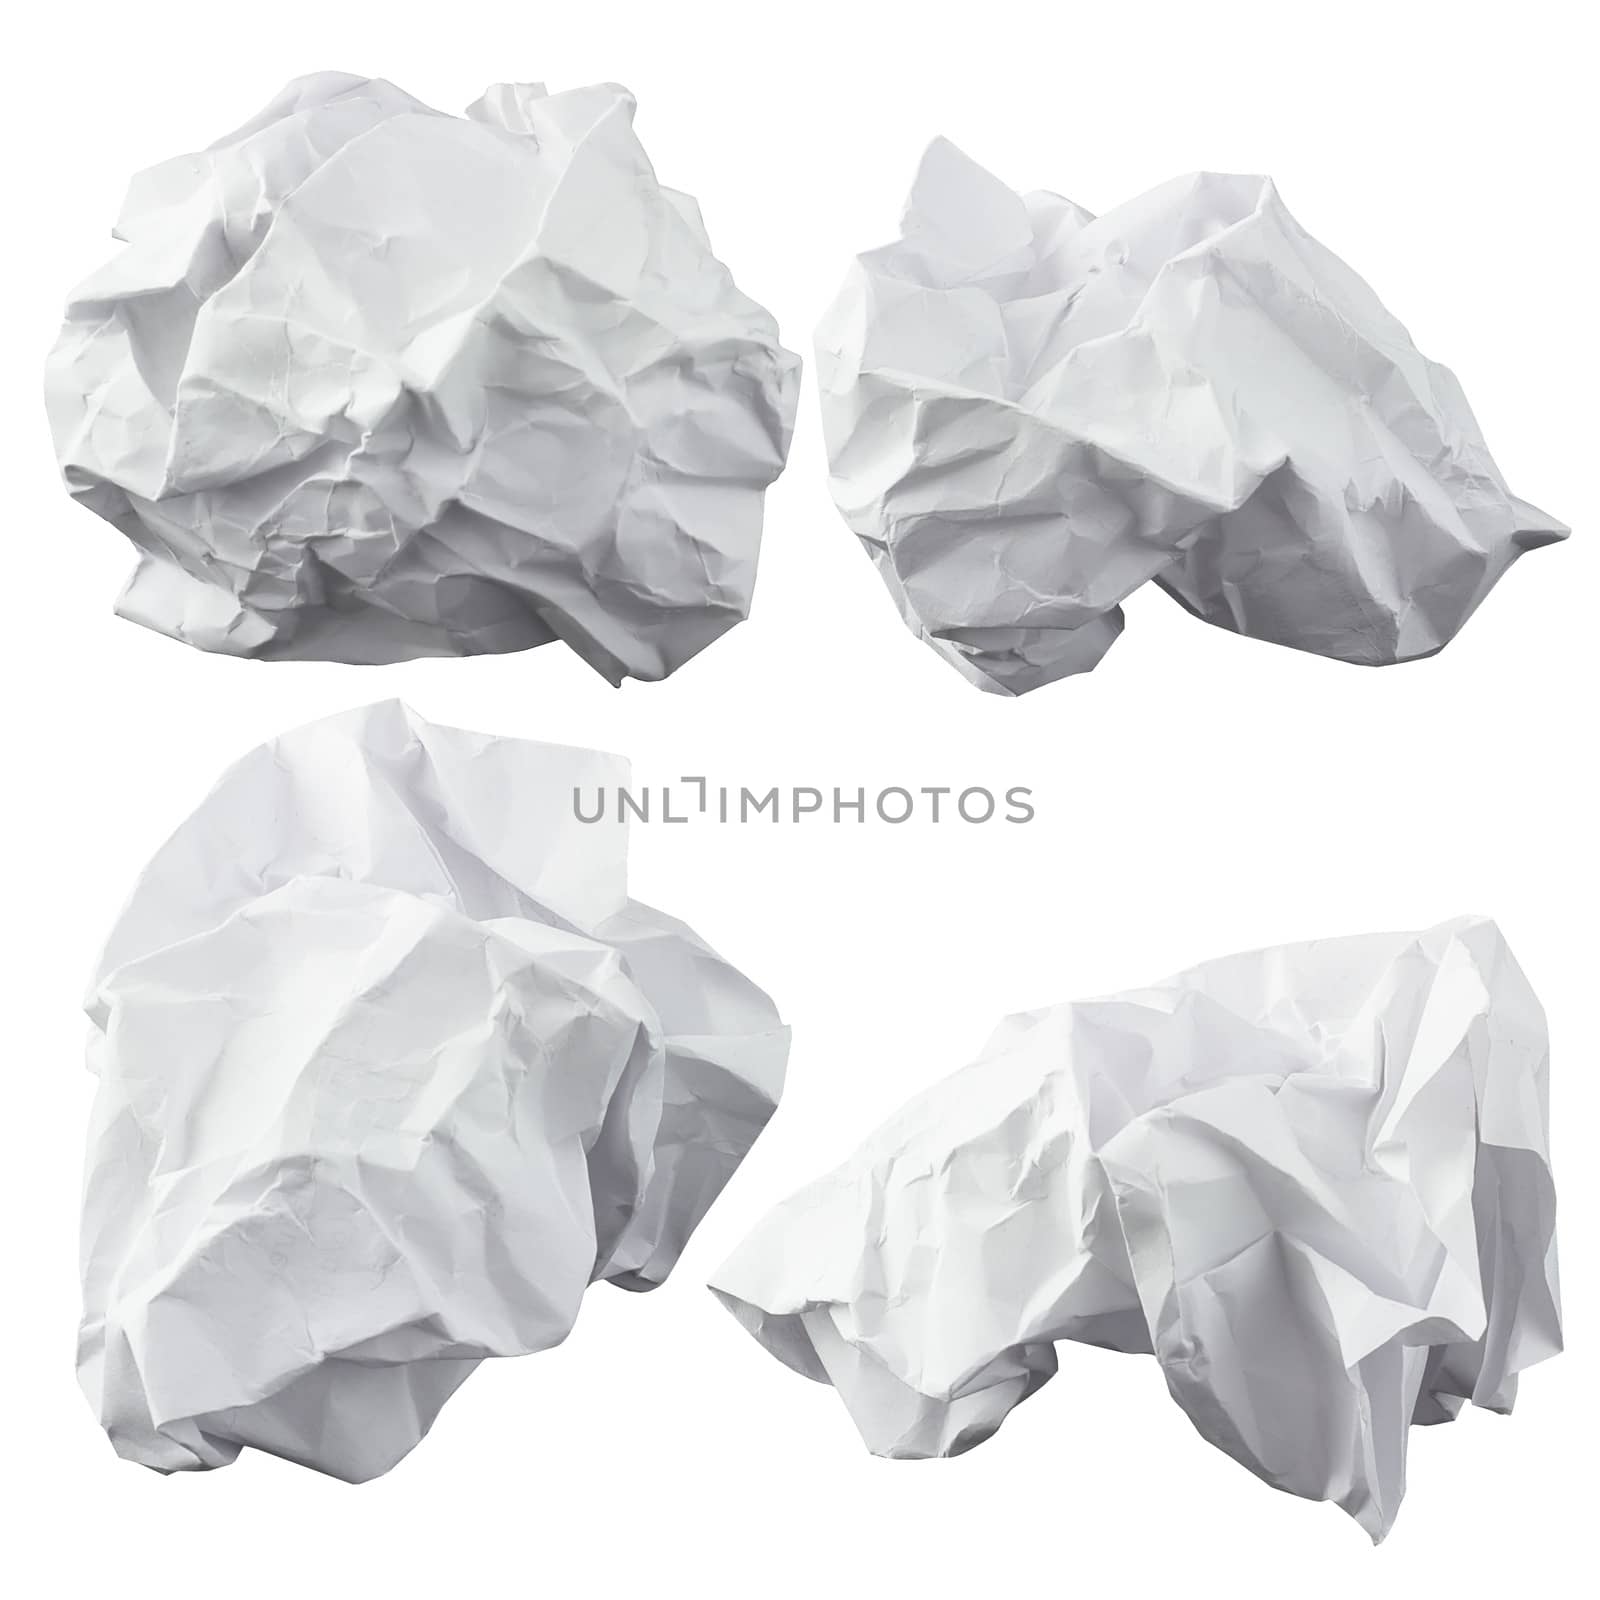 Crumpled paper by cherezoff